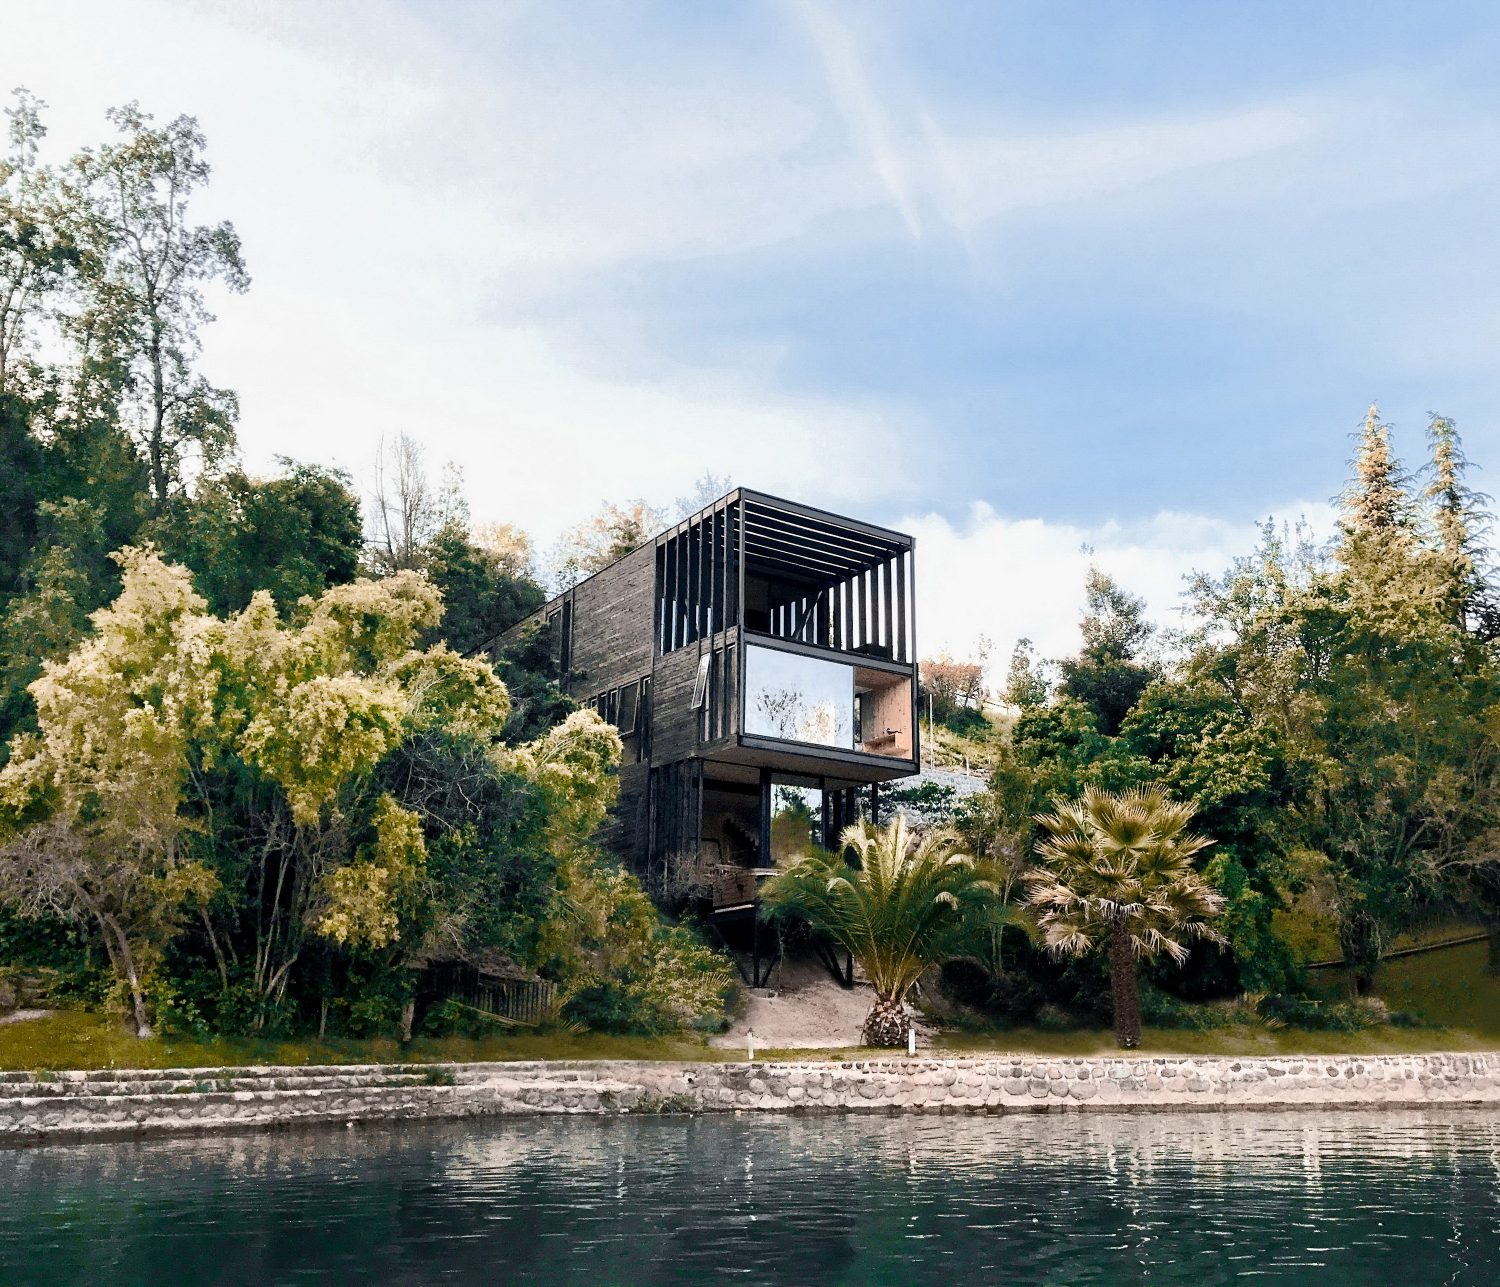 Slope House by Ian Hsü and Gabriel Rudolphy